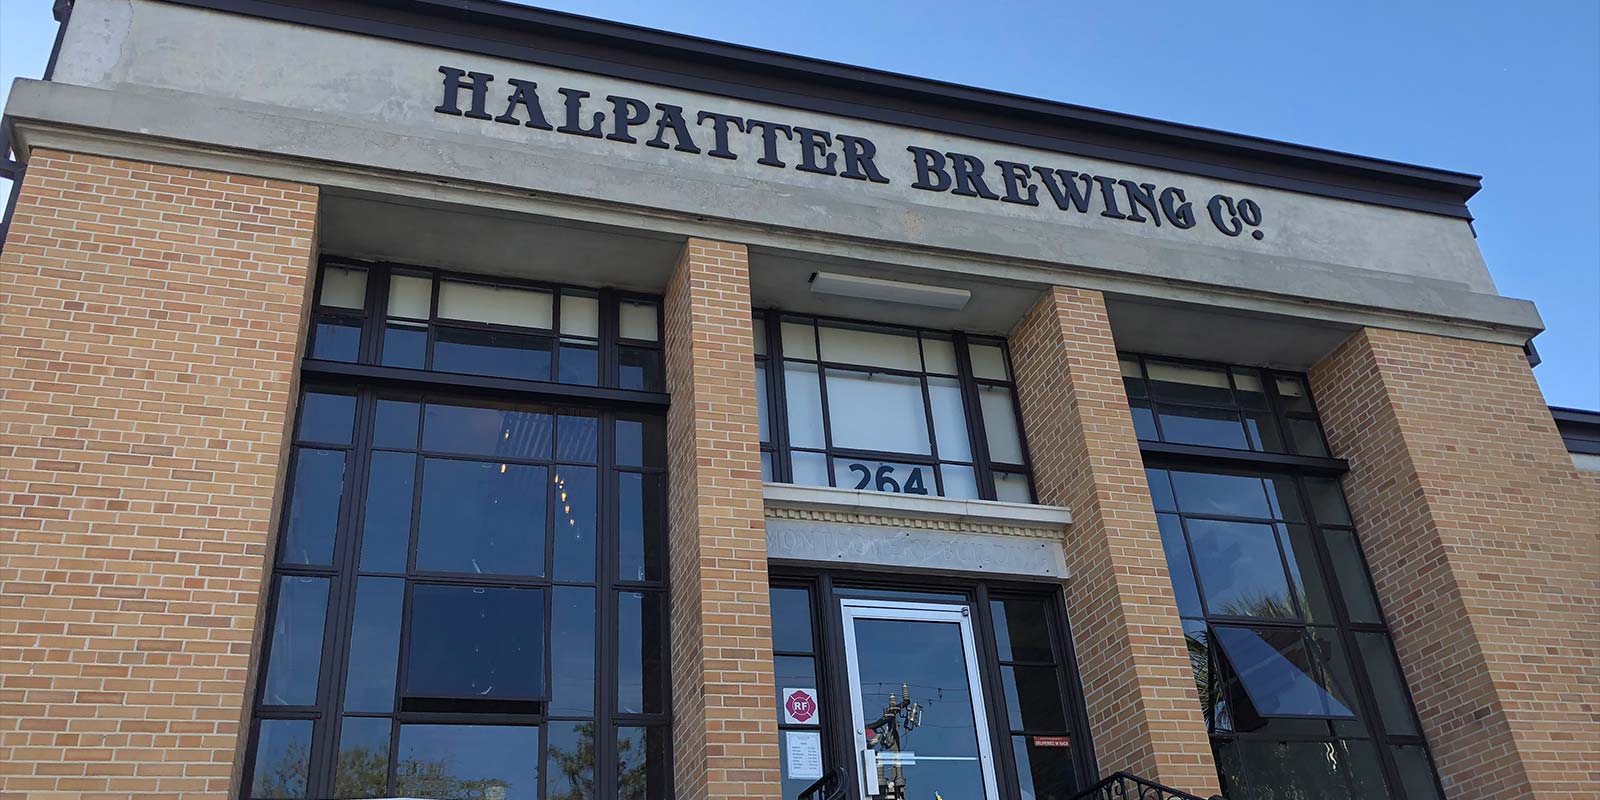 exterior of Halpatter Brewing Co. building